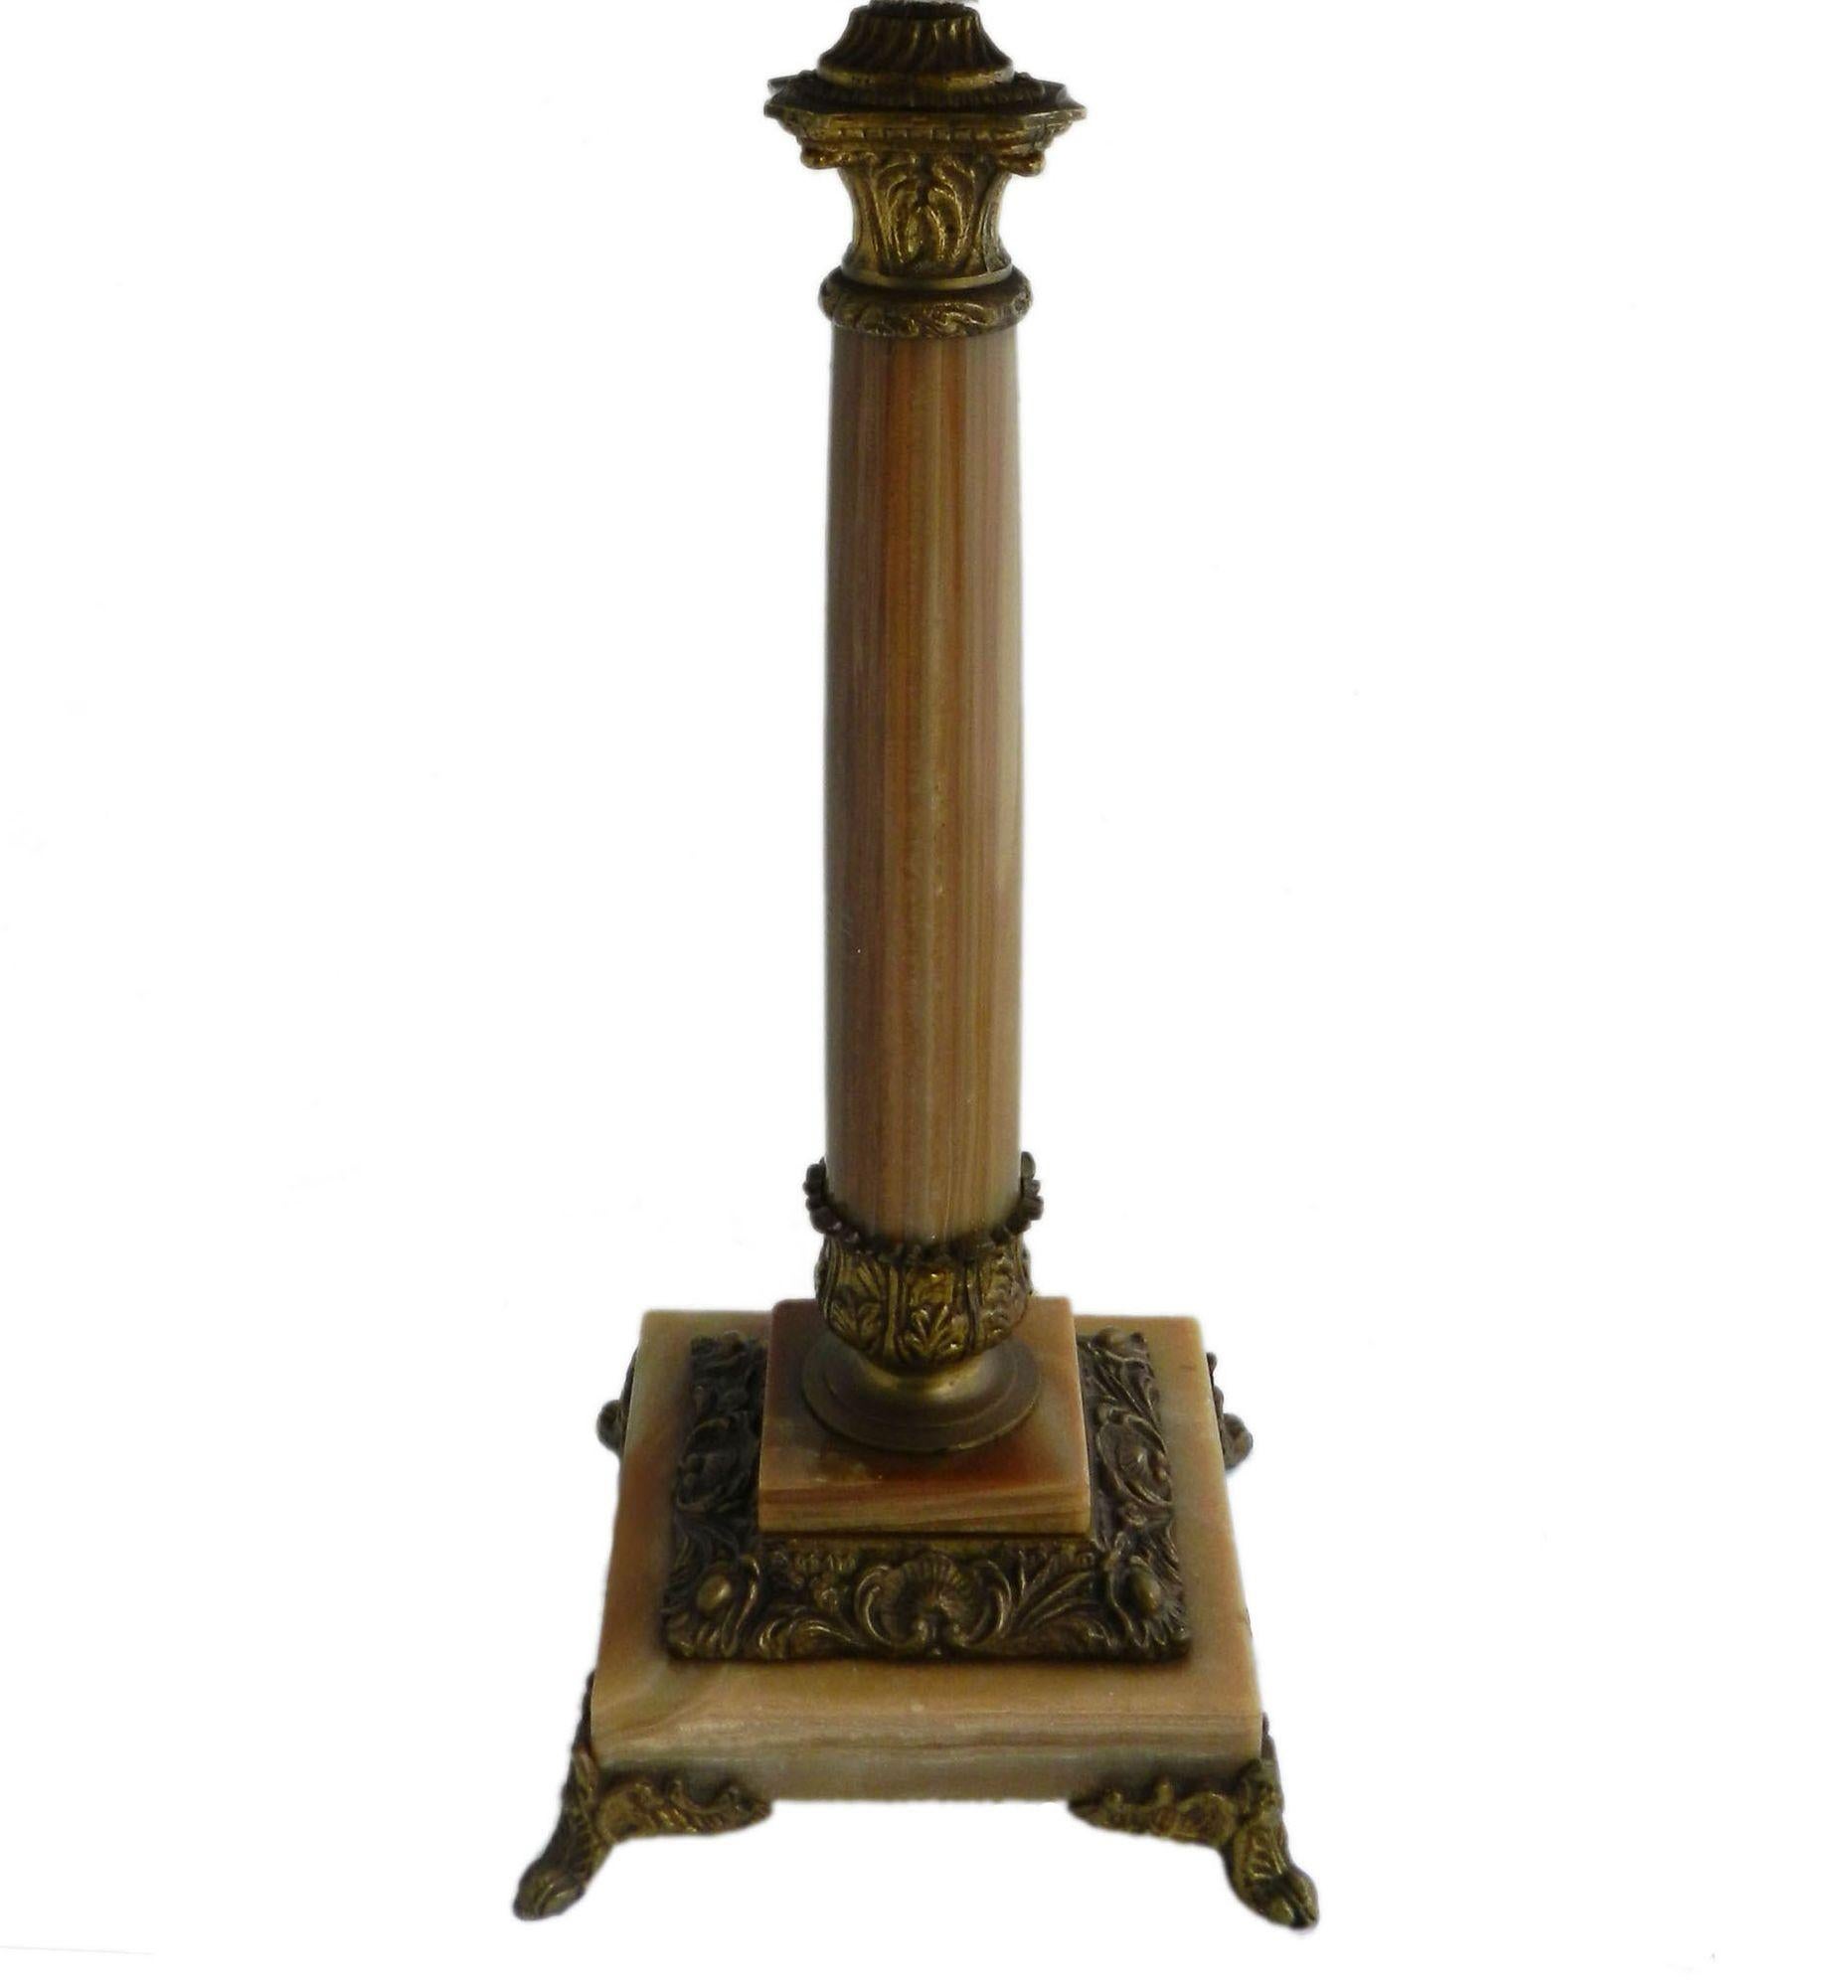 Column Table Lamp French c1910 
Marble and Bronze
In good vinTage condition with minor signs of use
Verified and restored to go in Vintage Glory
This will be rewired ready for US standards or EU and UK standards please let us know which country